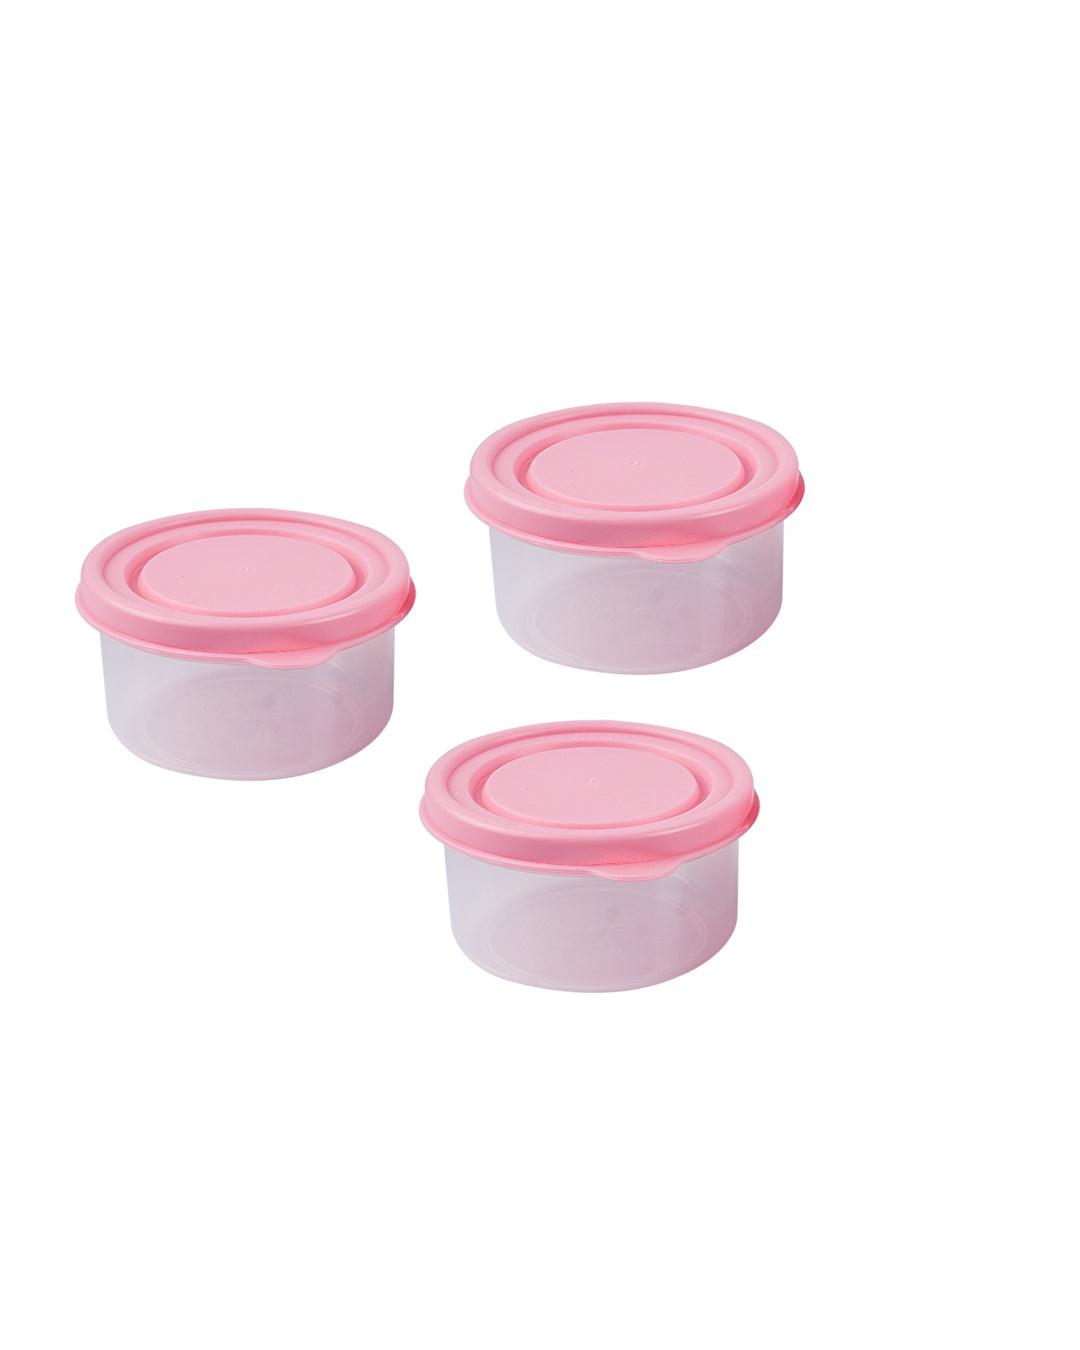 Food Storage Containers, Pink, Plastic, Set of 3, 160 mL - MARKET 99